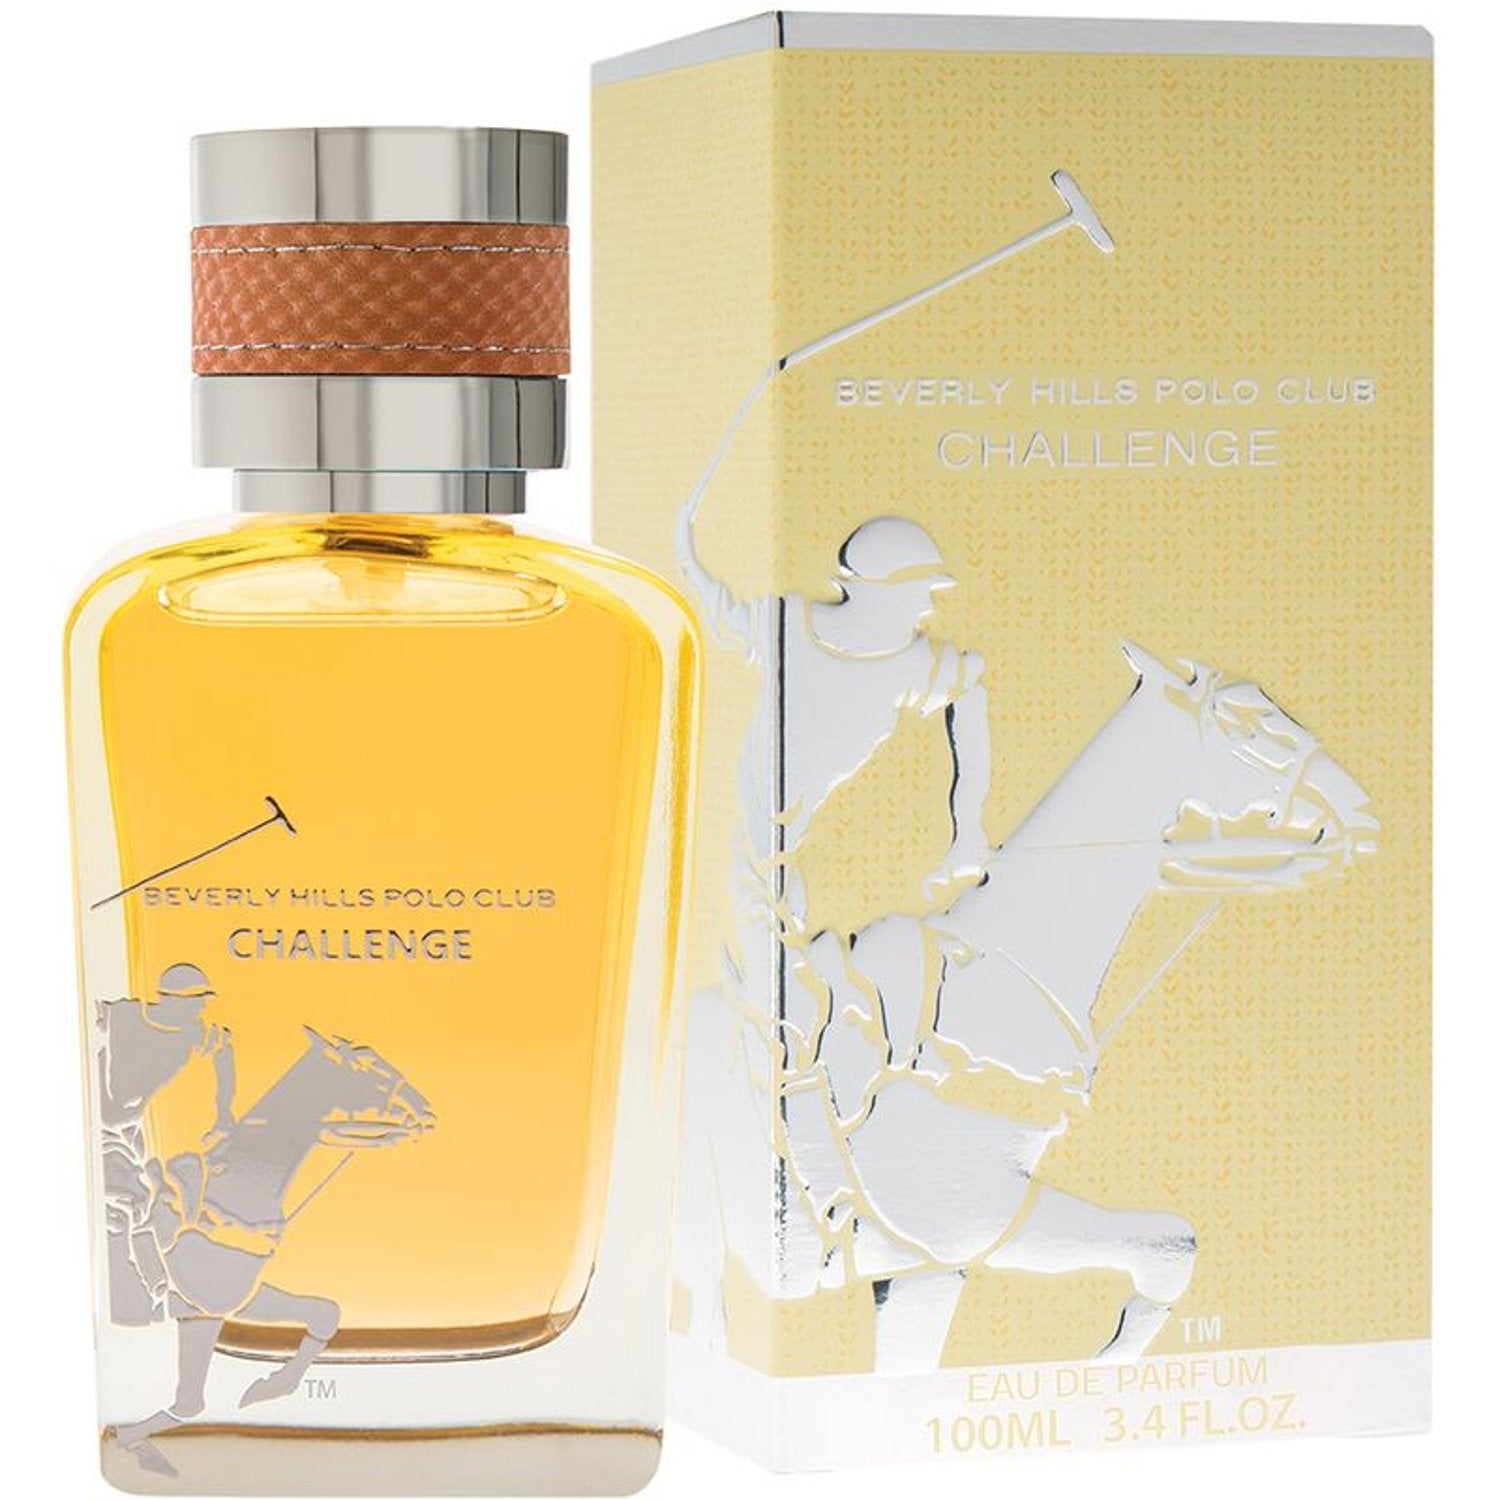 Beverly Hills Polo Club Challenge Perfume | Fragrance for Women | Personal Care Accessories in Bahrain | Halabh